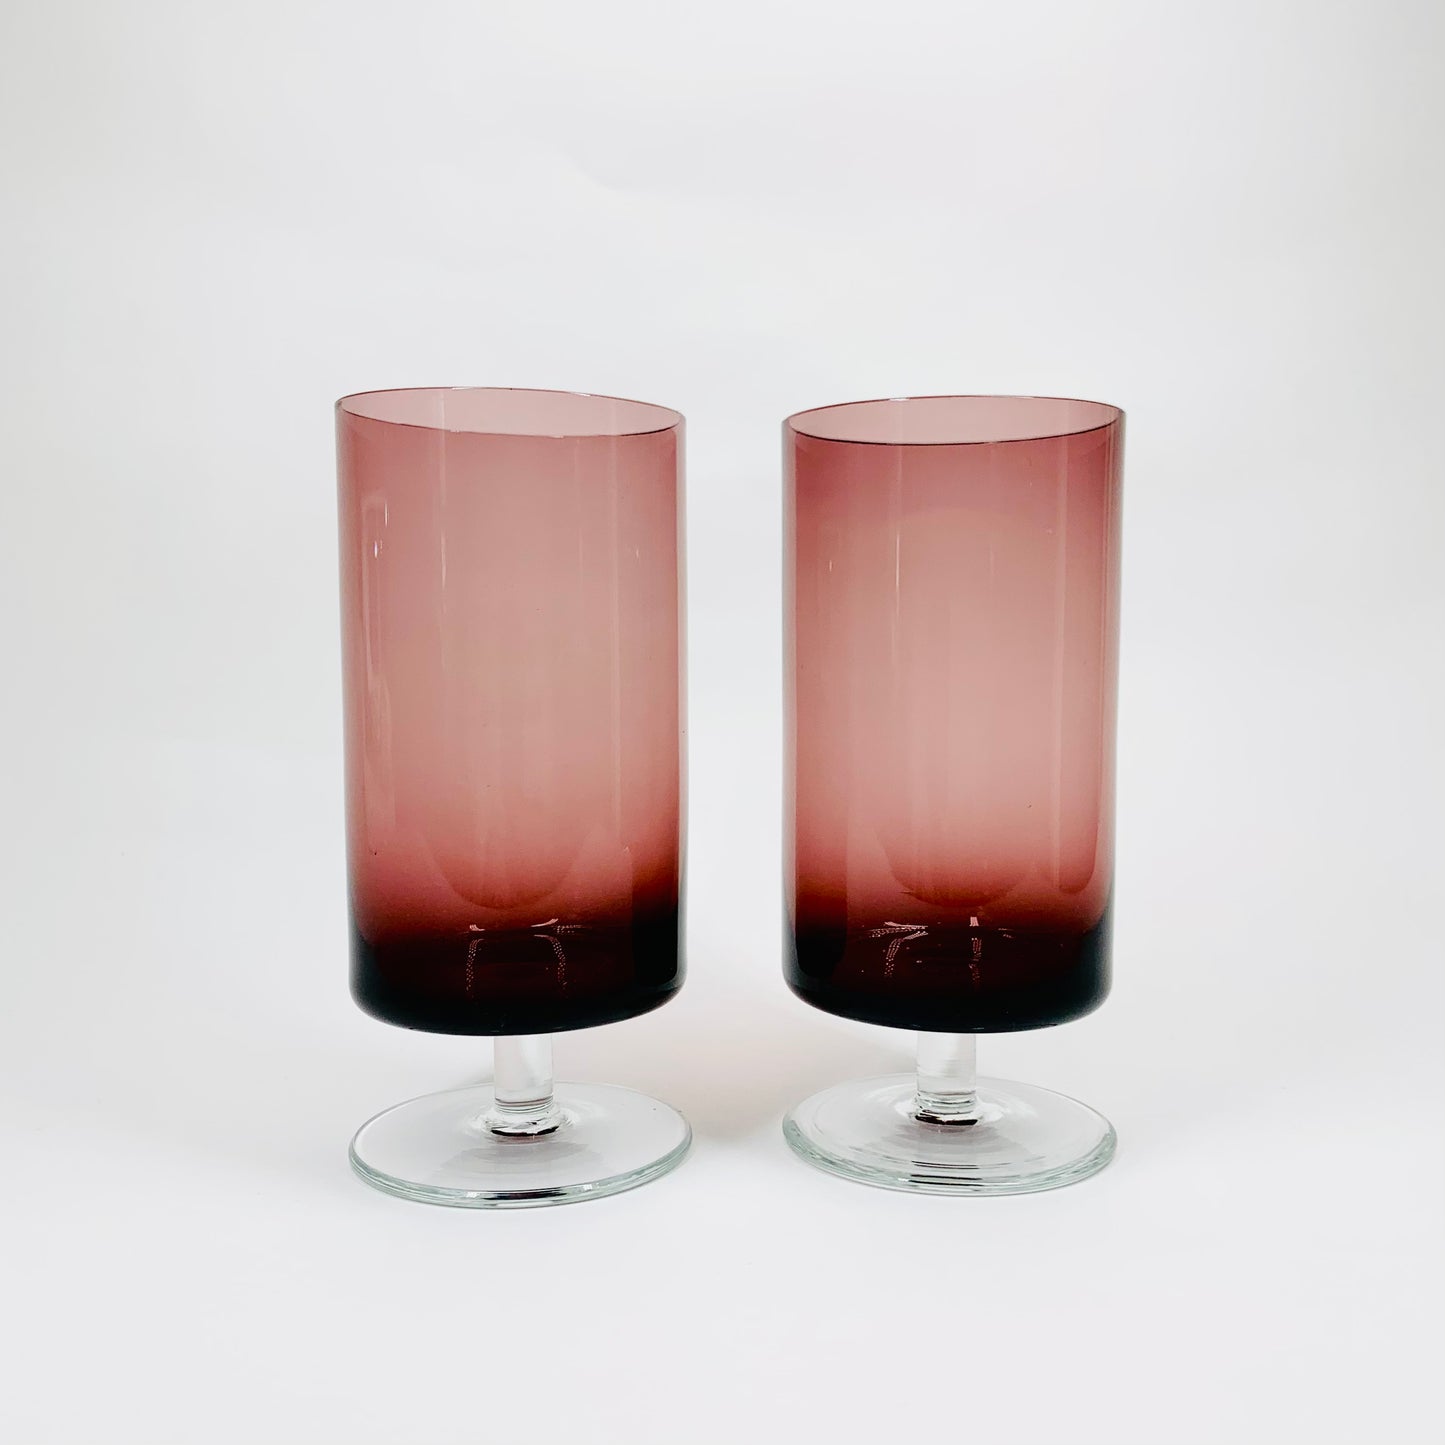 Extremely rare Midcentury amethyst footed highball/wine glasses